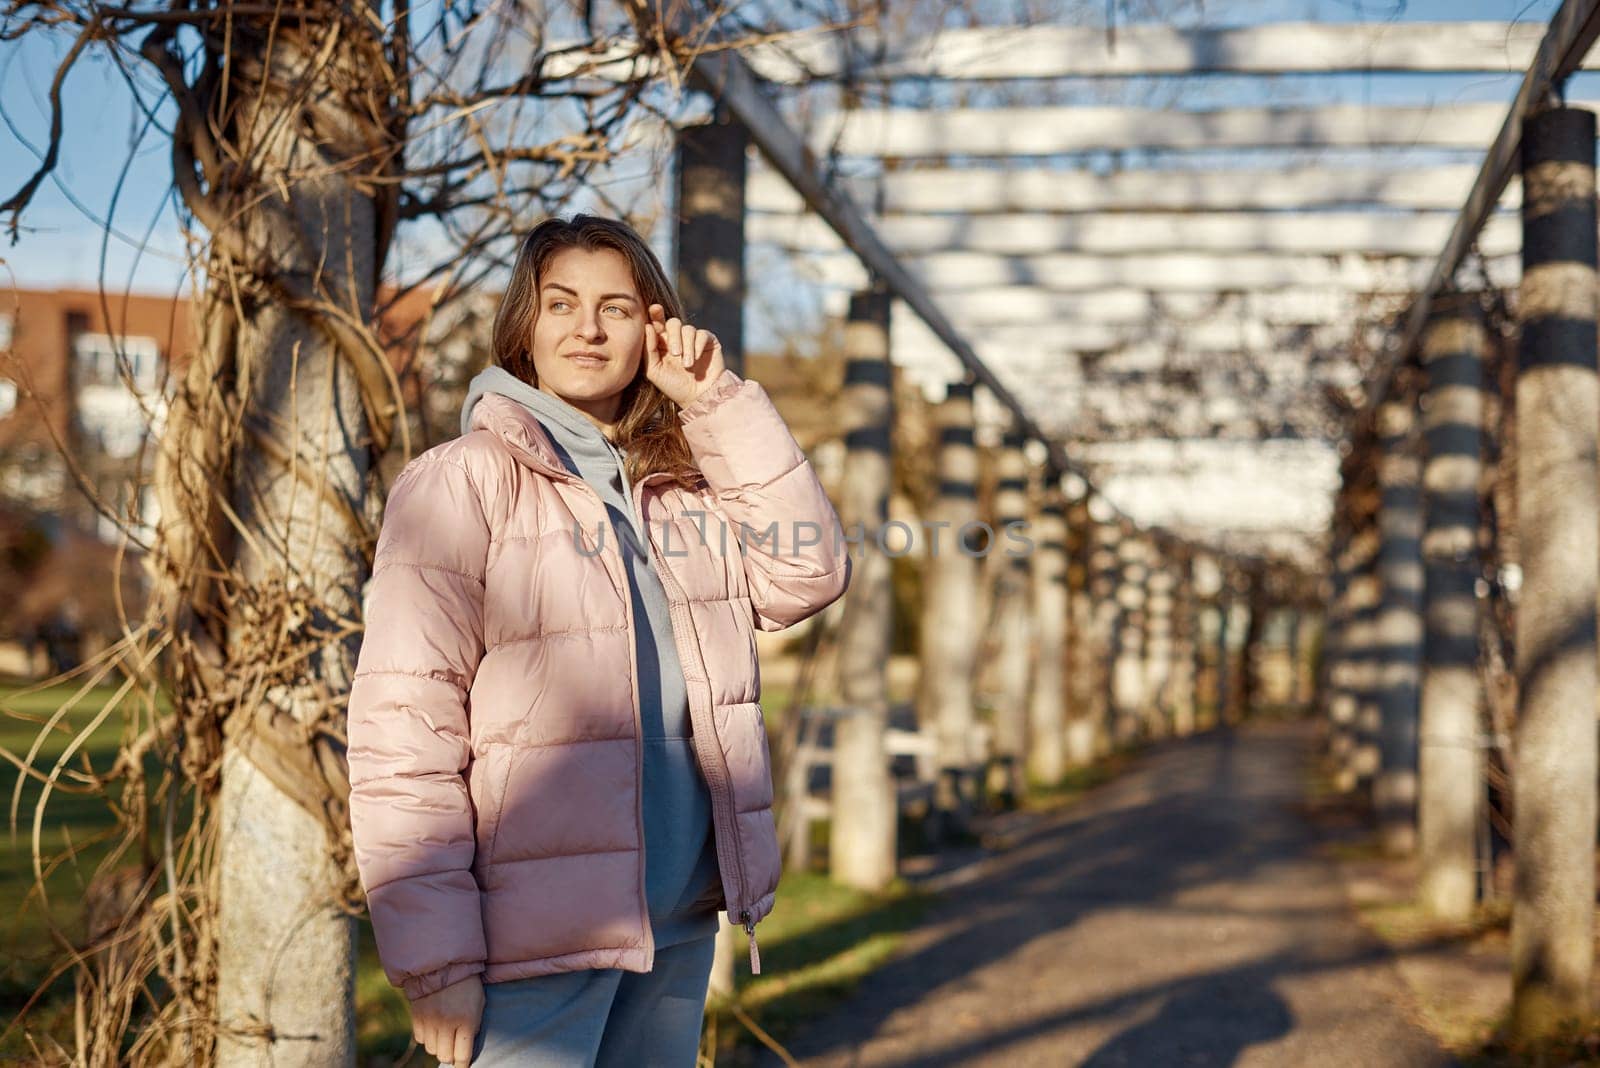 Winter Fun in Bitigheim-Bissingen: Beautiful Girl in Pink Jacket Amidst Half-Timbered Charm. a lovely girl in a pink winter jacket standing in the archway of the historic town of Bitigheim-Bissingen, Baden-Wurttemberg, Germany. by Andrii_Ko